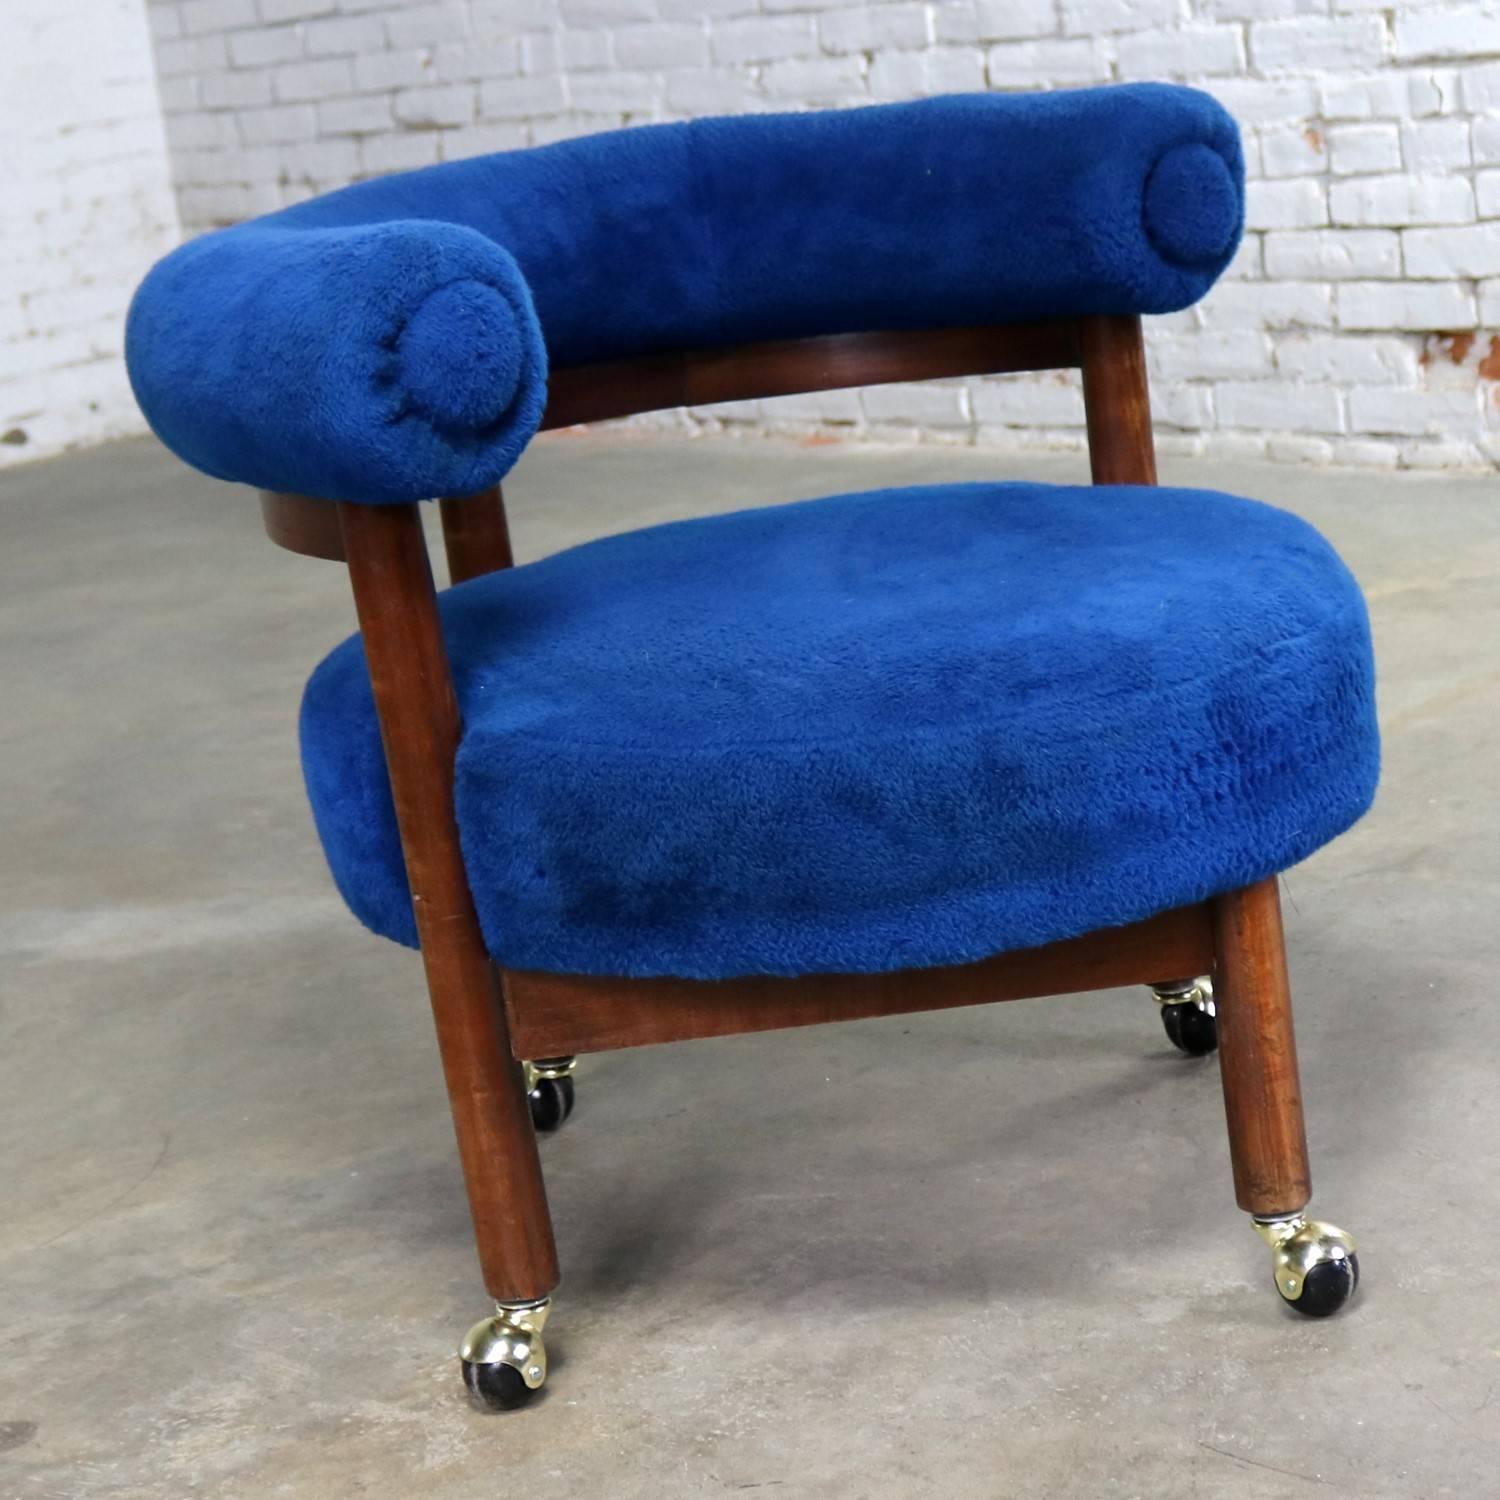 Birch Royal Blue Round Corner Chair with Bolster Back on Casters Midcentury